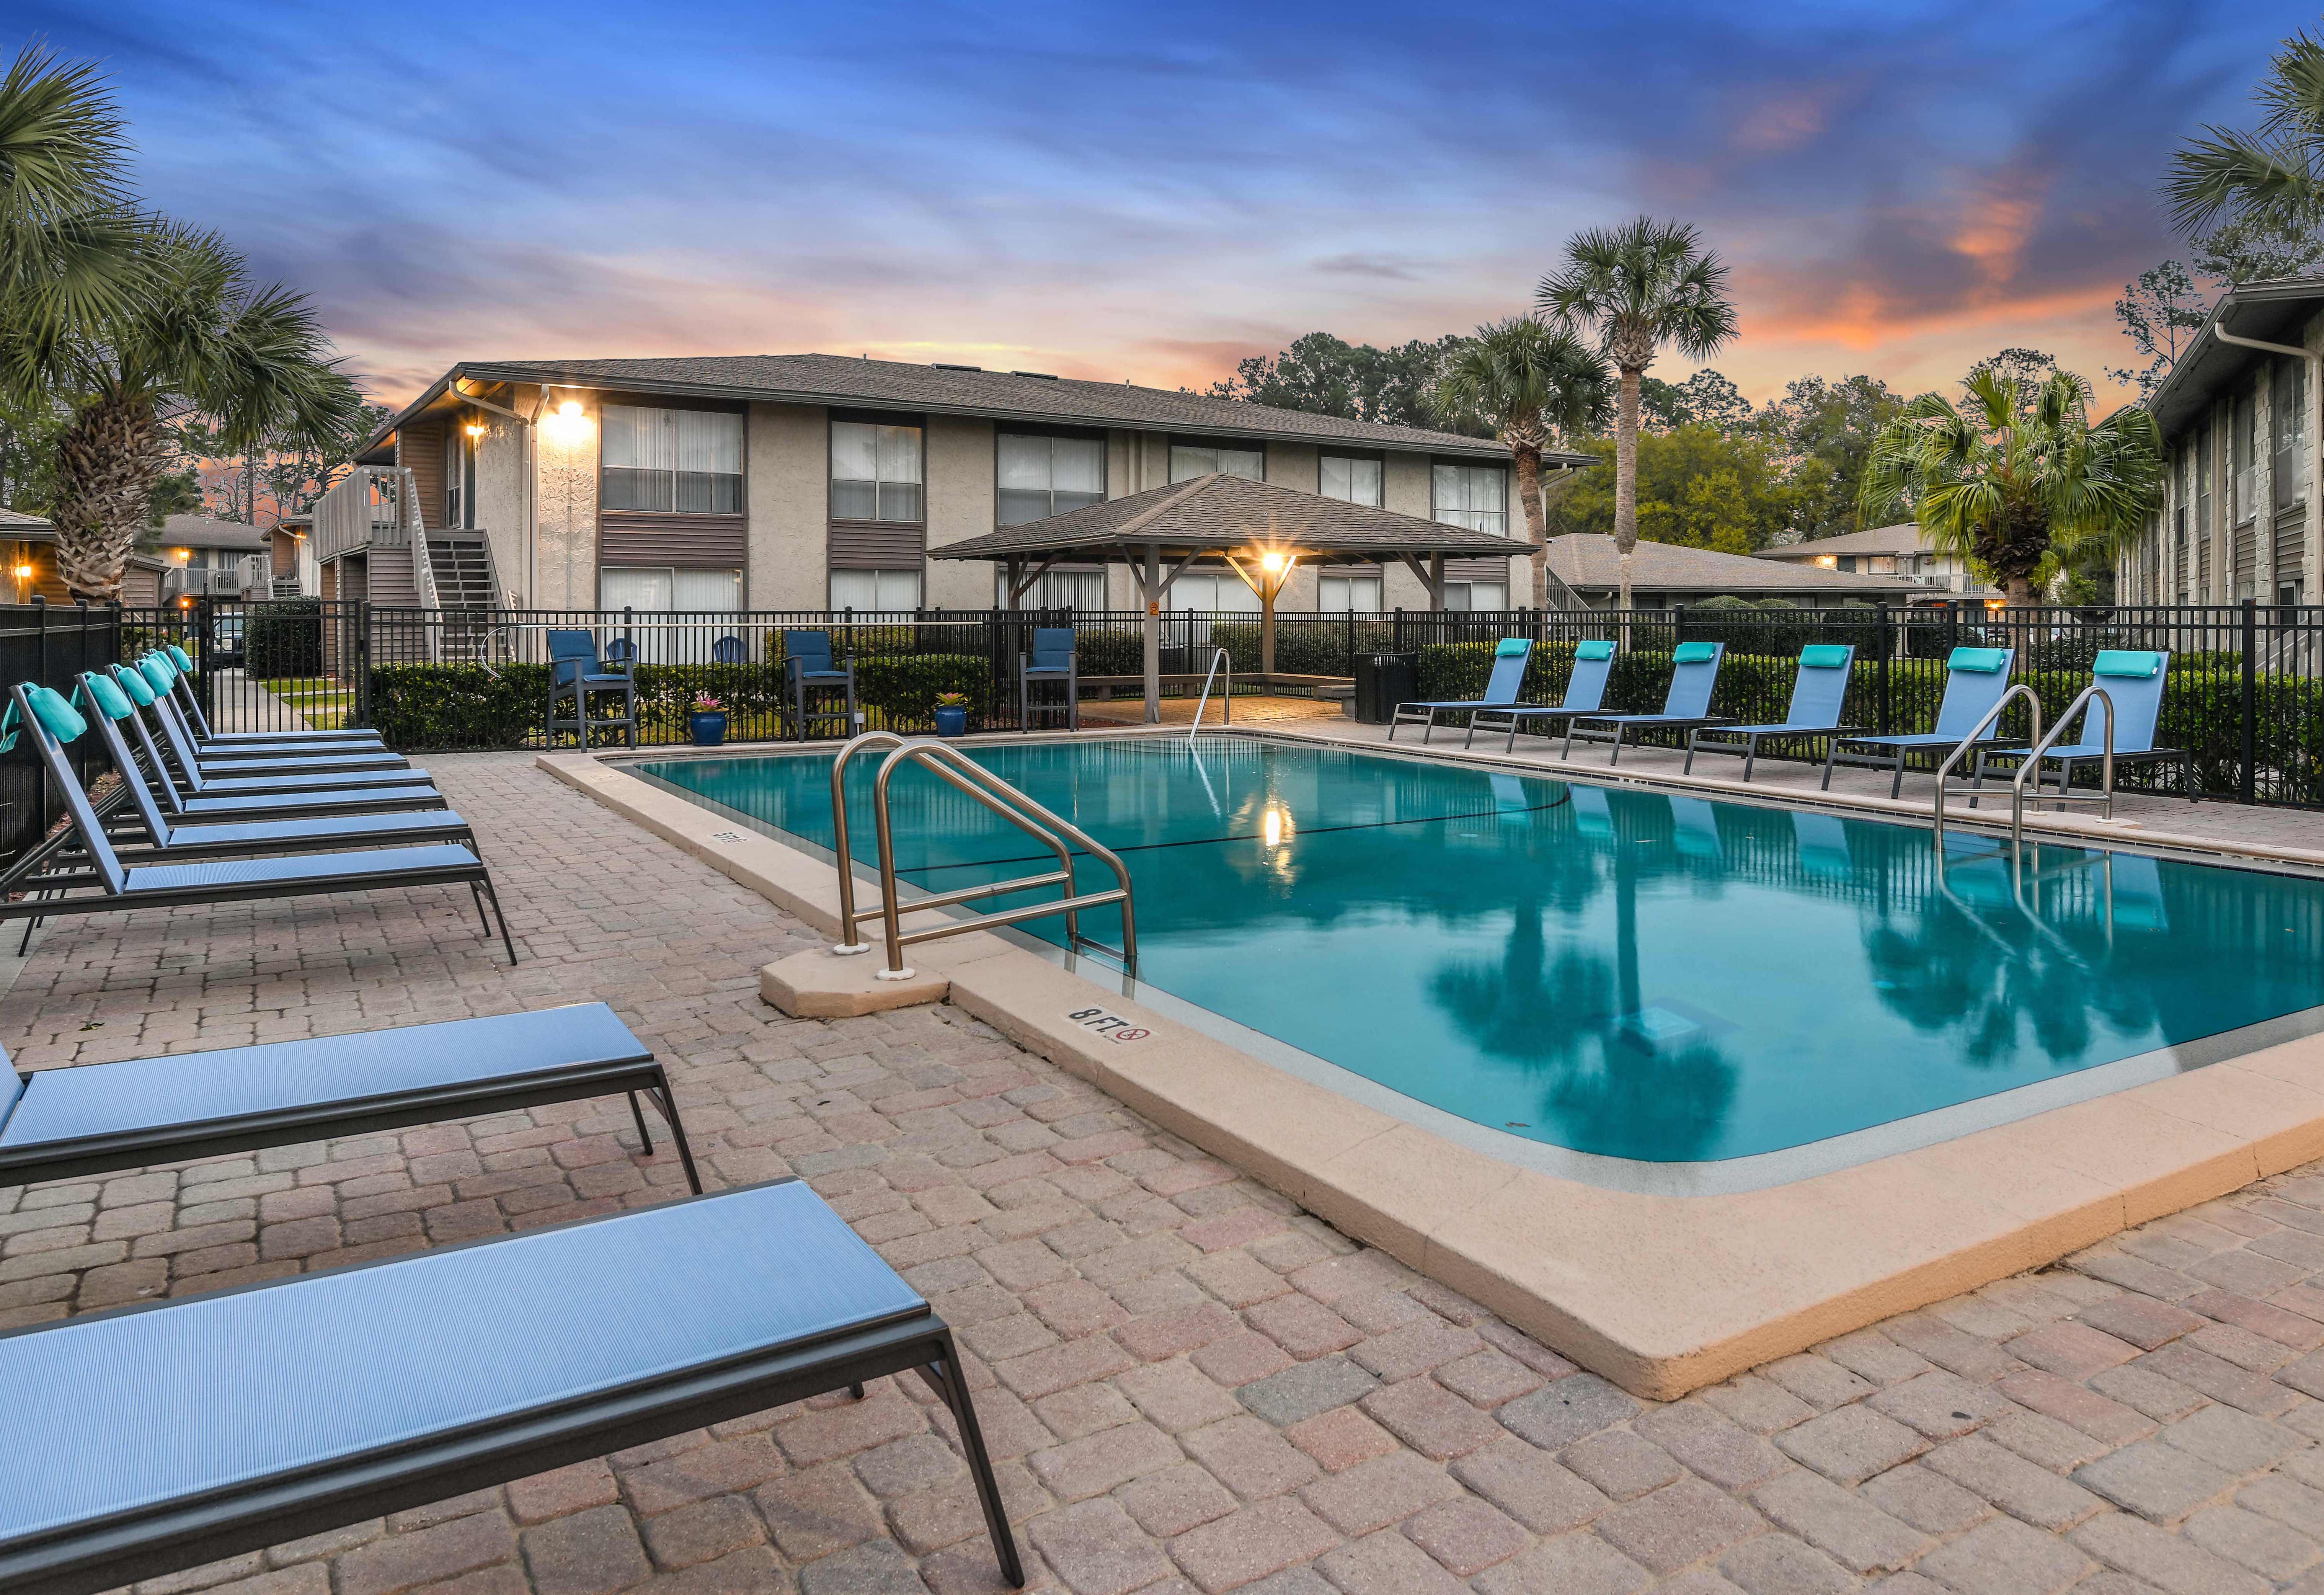 PIA Residential and BH Equities Acquires 284-Unit St. John’s Pointe Apartment Community in Jacksonville Submarket for $33.4 Million